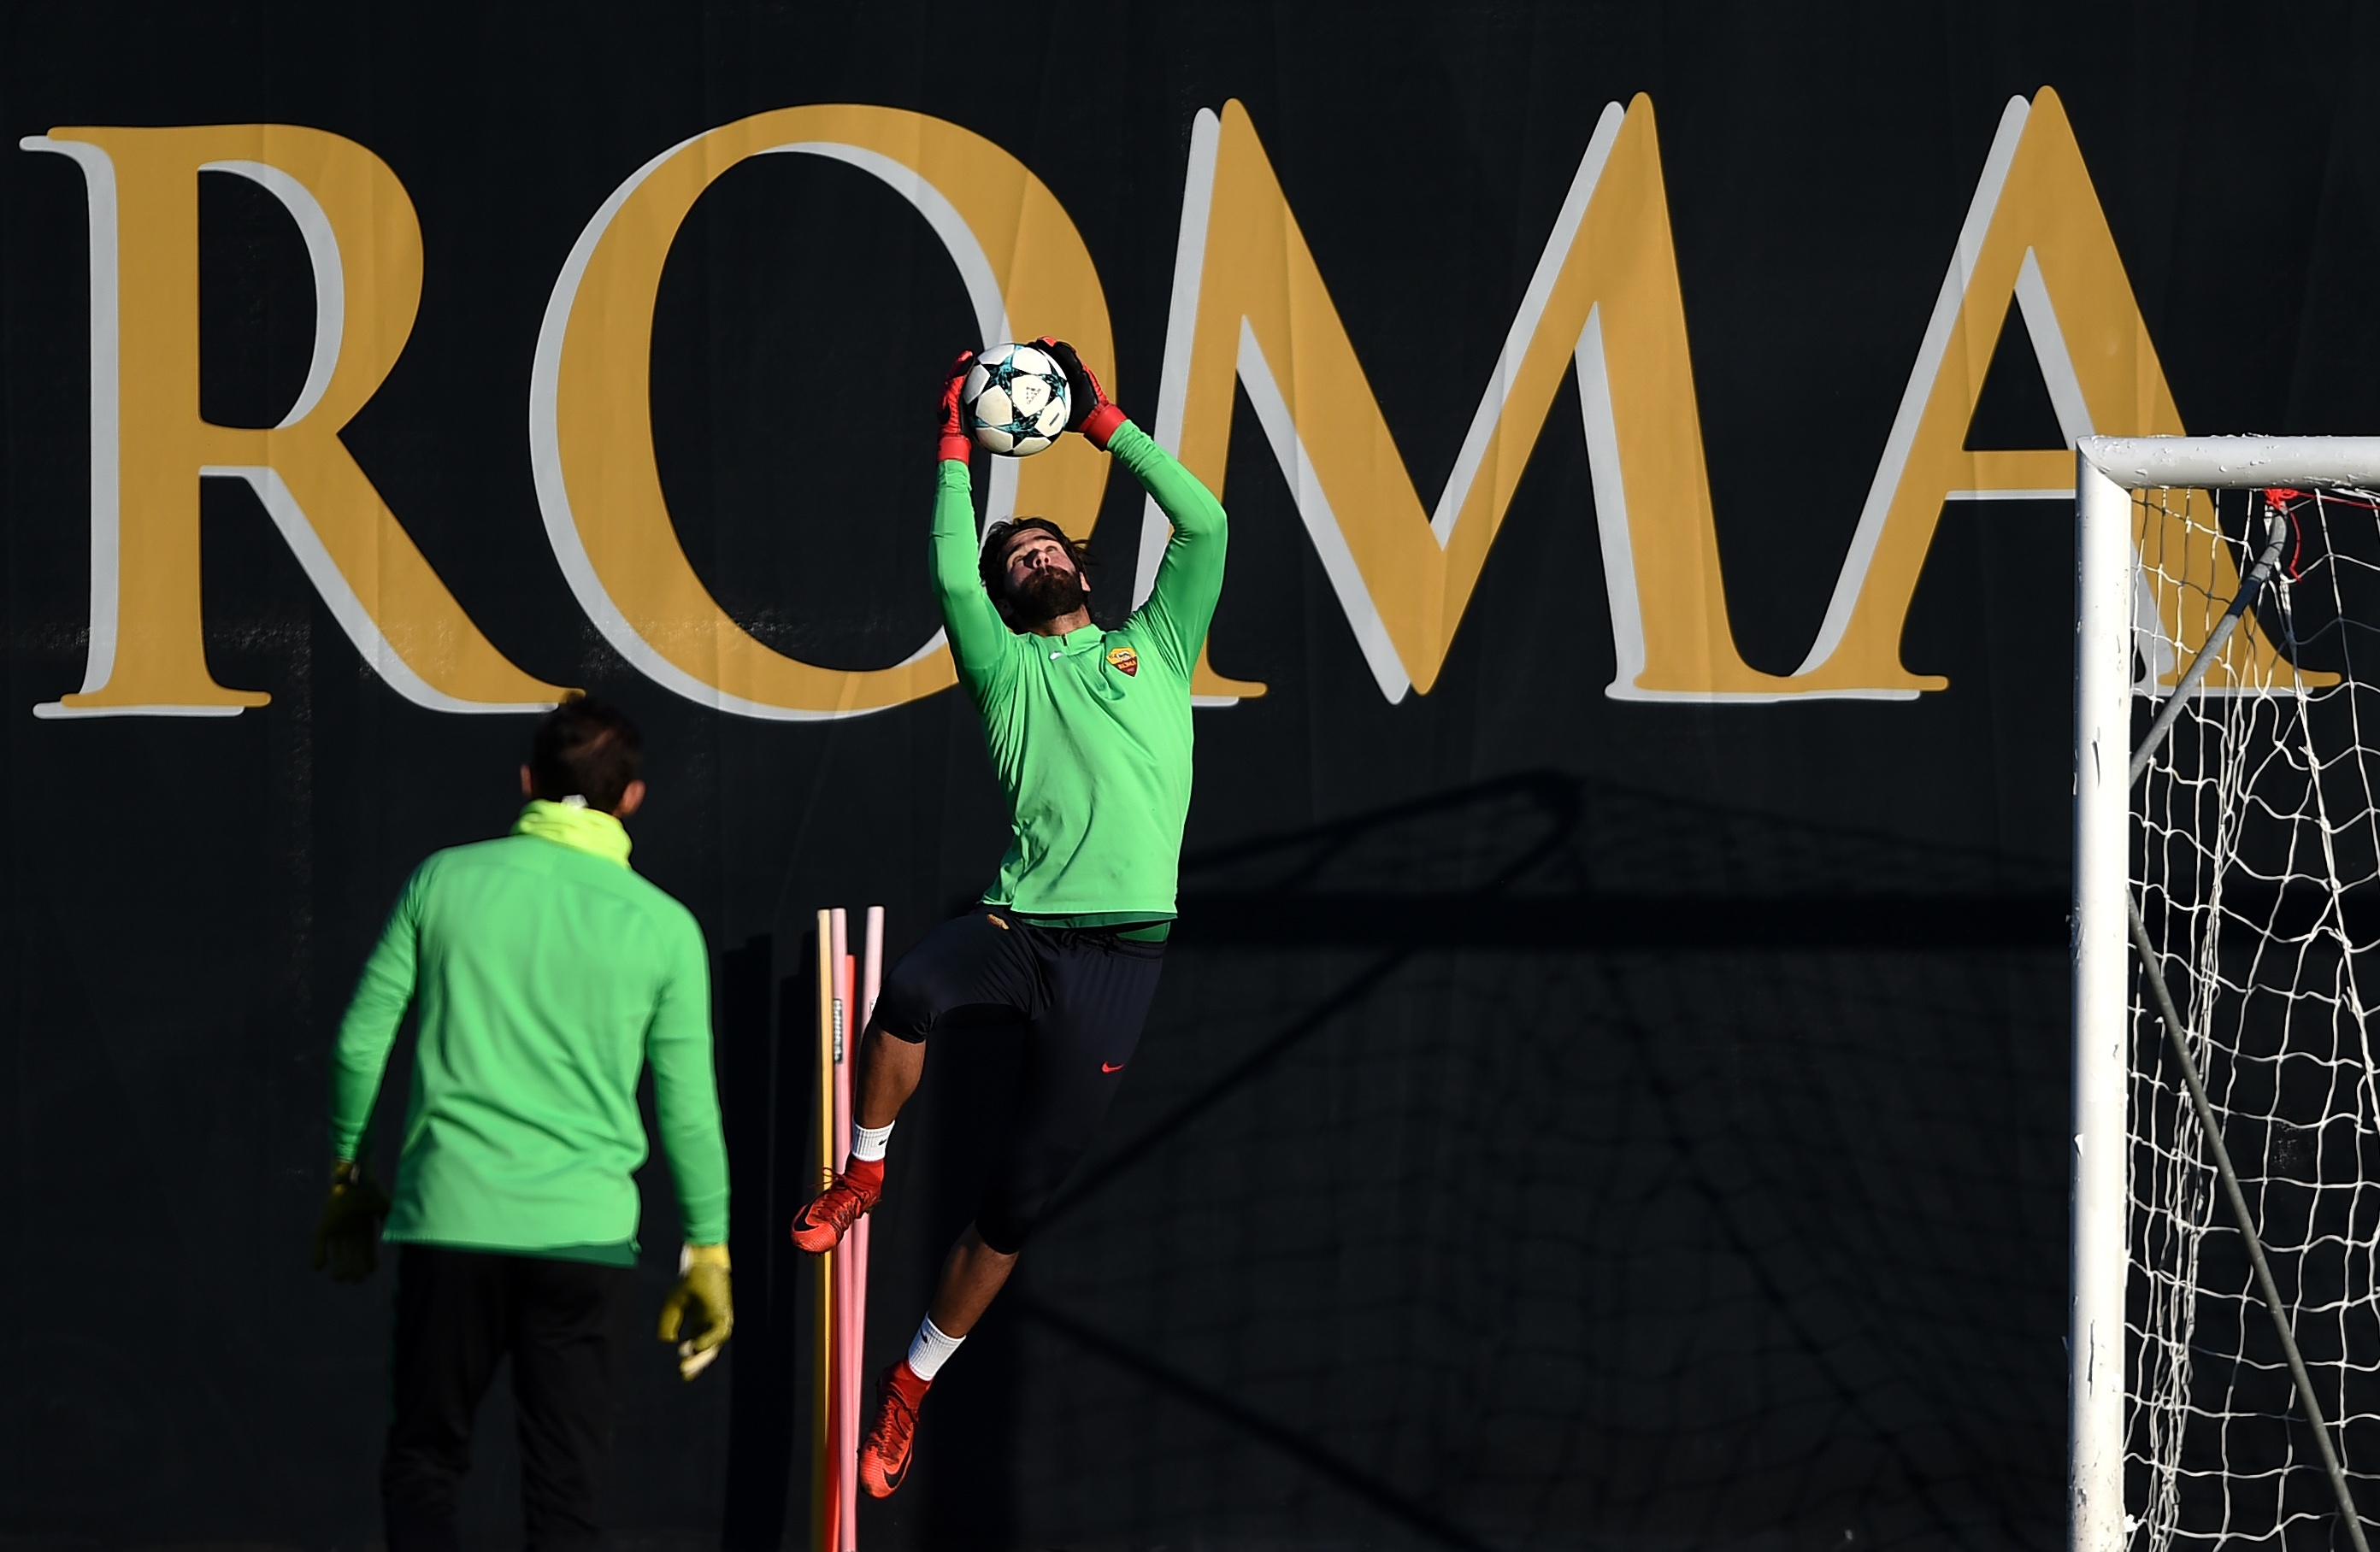 Roma's goalkeeper from Brazil Alisson take part in a training session on the eve of the UEFA Champions League football match AS Roma vs Qarabag on December 4, 2017 at Trigoria training ground near Rome.  / AFP PHOTO / FILIPPO MONTEFORTE        (Photo credit should read FILIPPO MONTEFORTE/AFP/Getty Images)